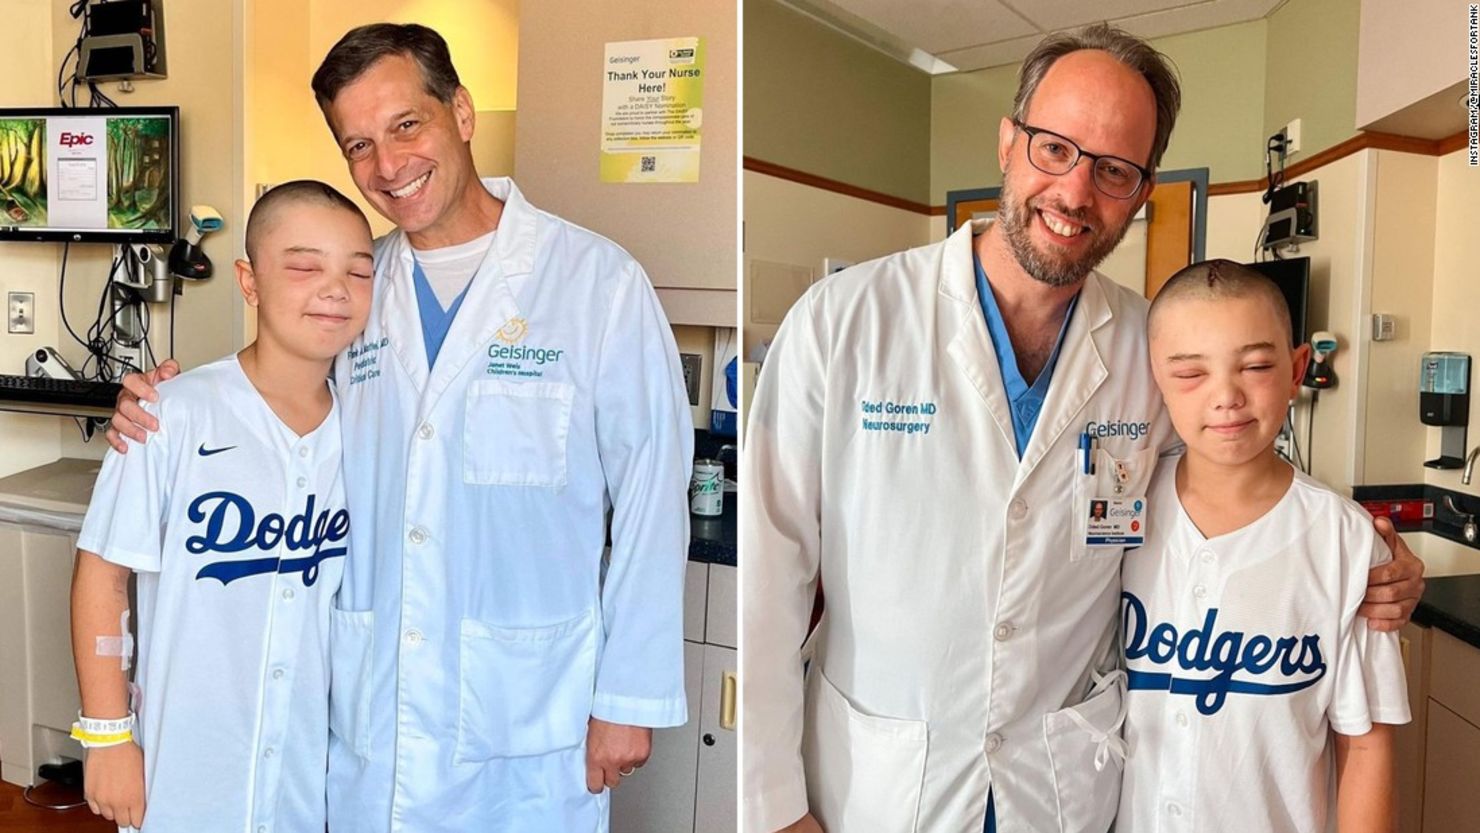 In an Instagram post, Easton Oliverson's loved ones thanked the doctors who have guided him through recovery at Geisinger Hospital in Danville, Pennsylvania.